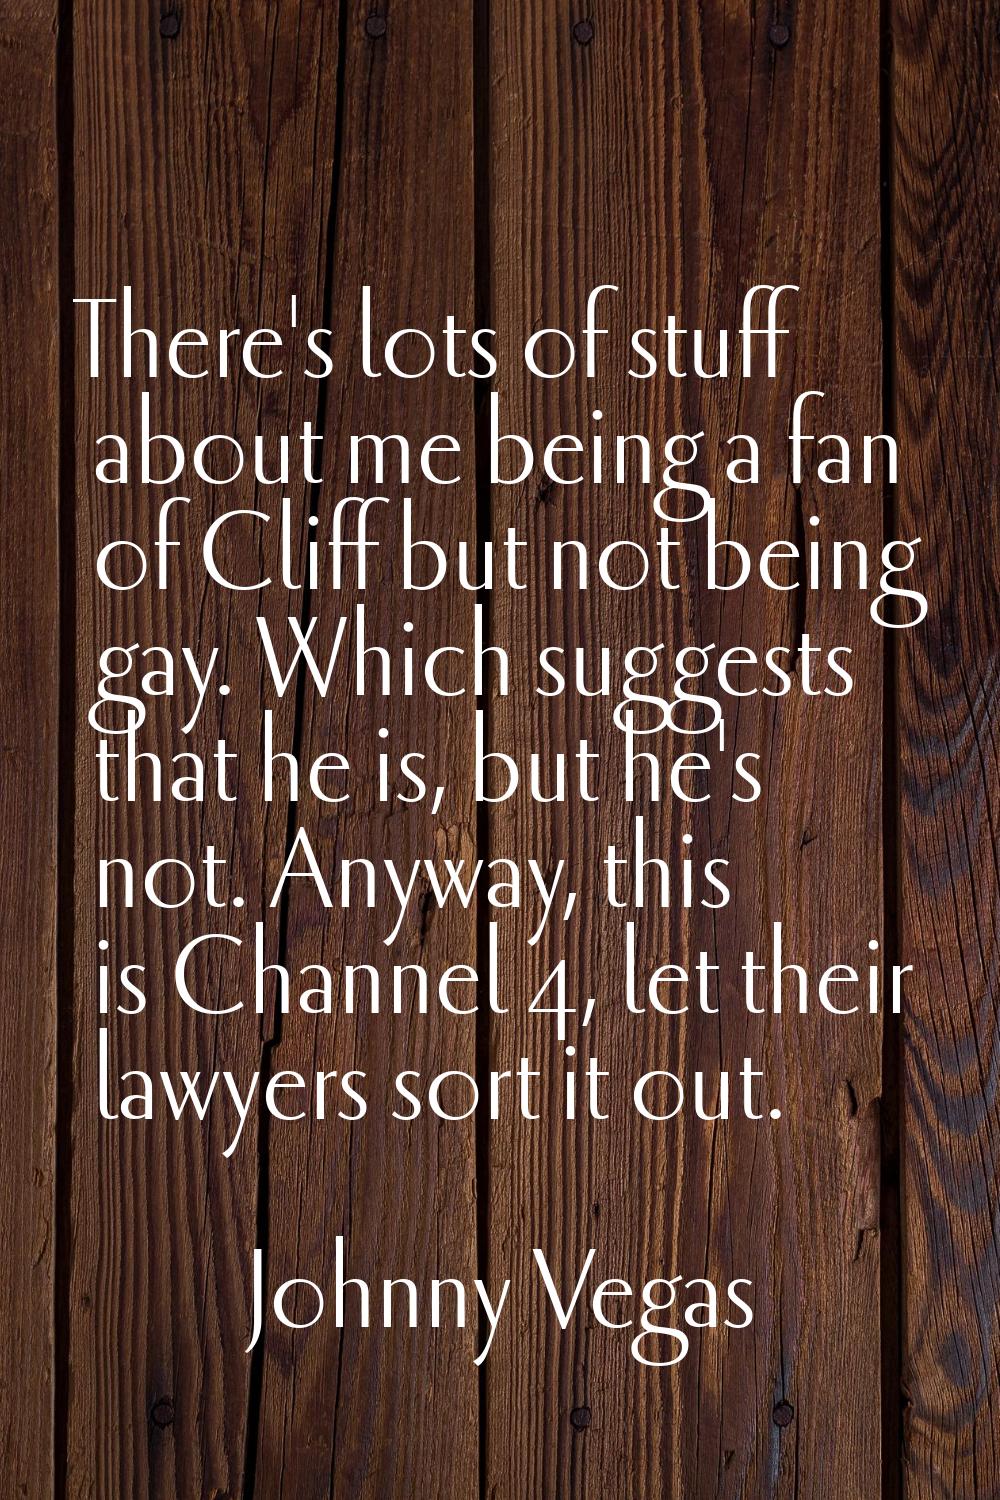 There's lots of stuff about me being a fan of Cliff but not being gay. Which suggests that he is, b